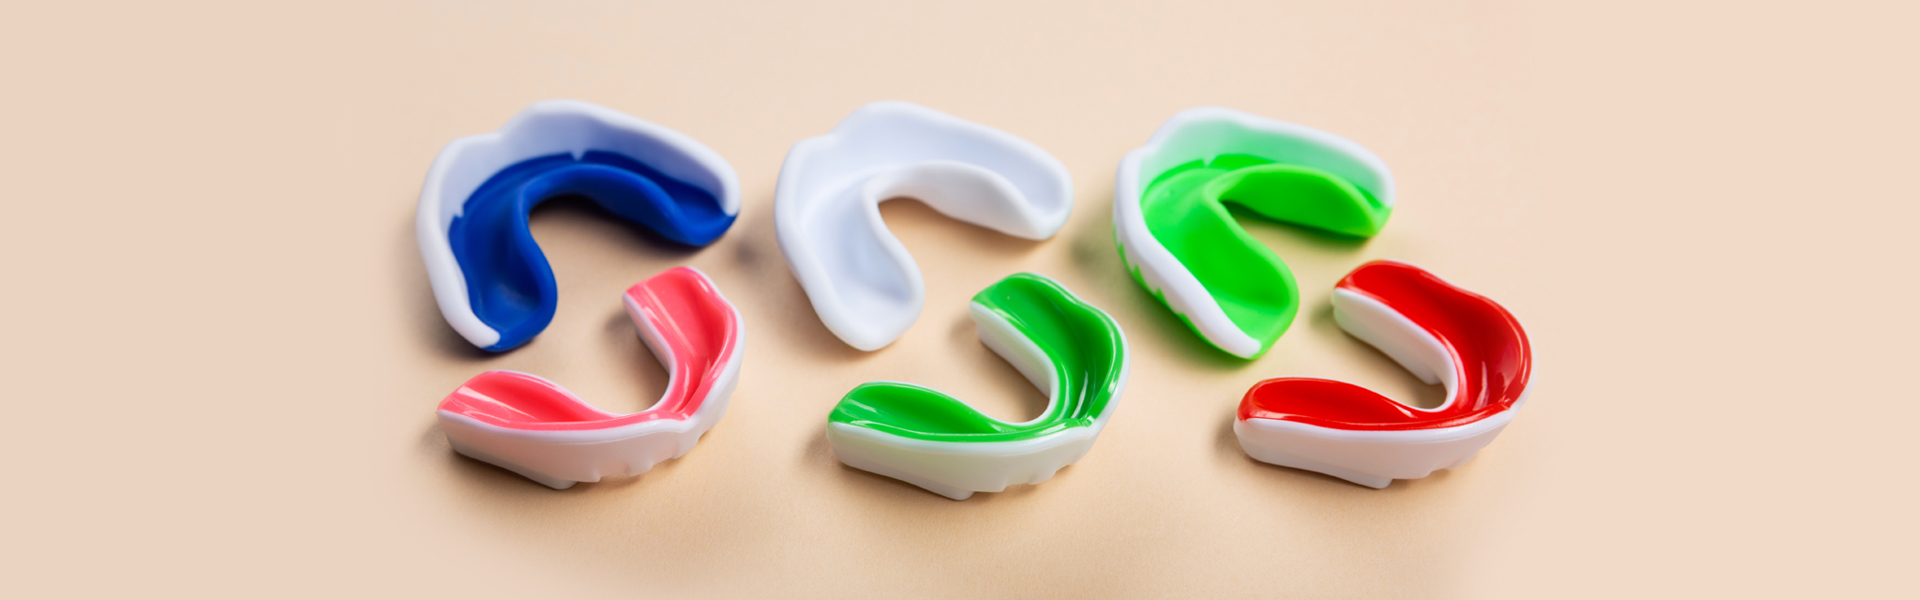 Benefits of Mouthguards for Teeth Grinding and Clenching 